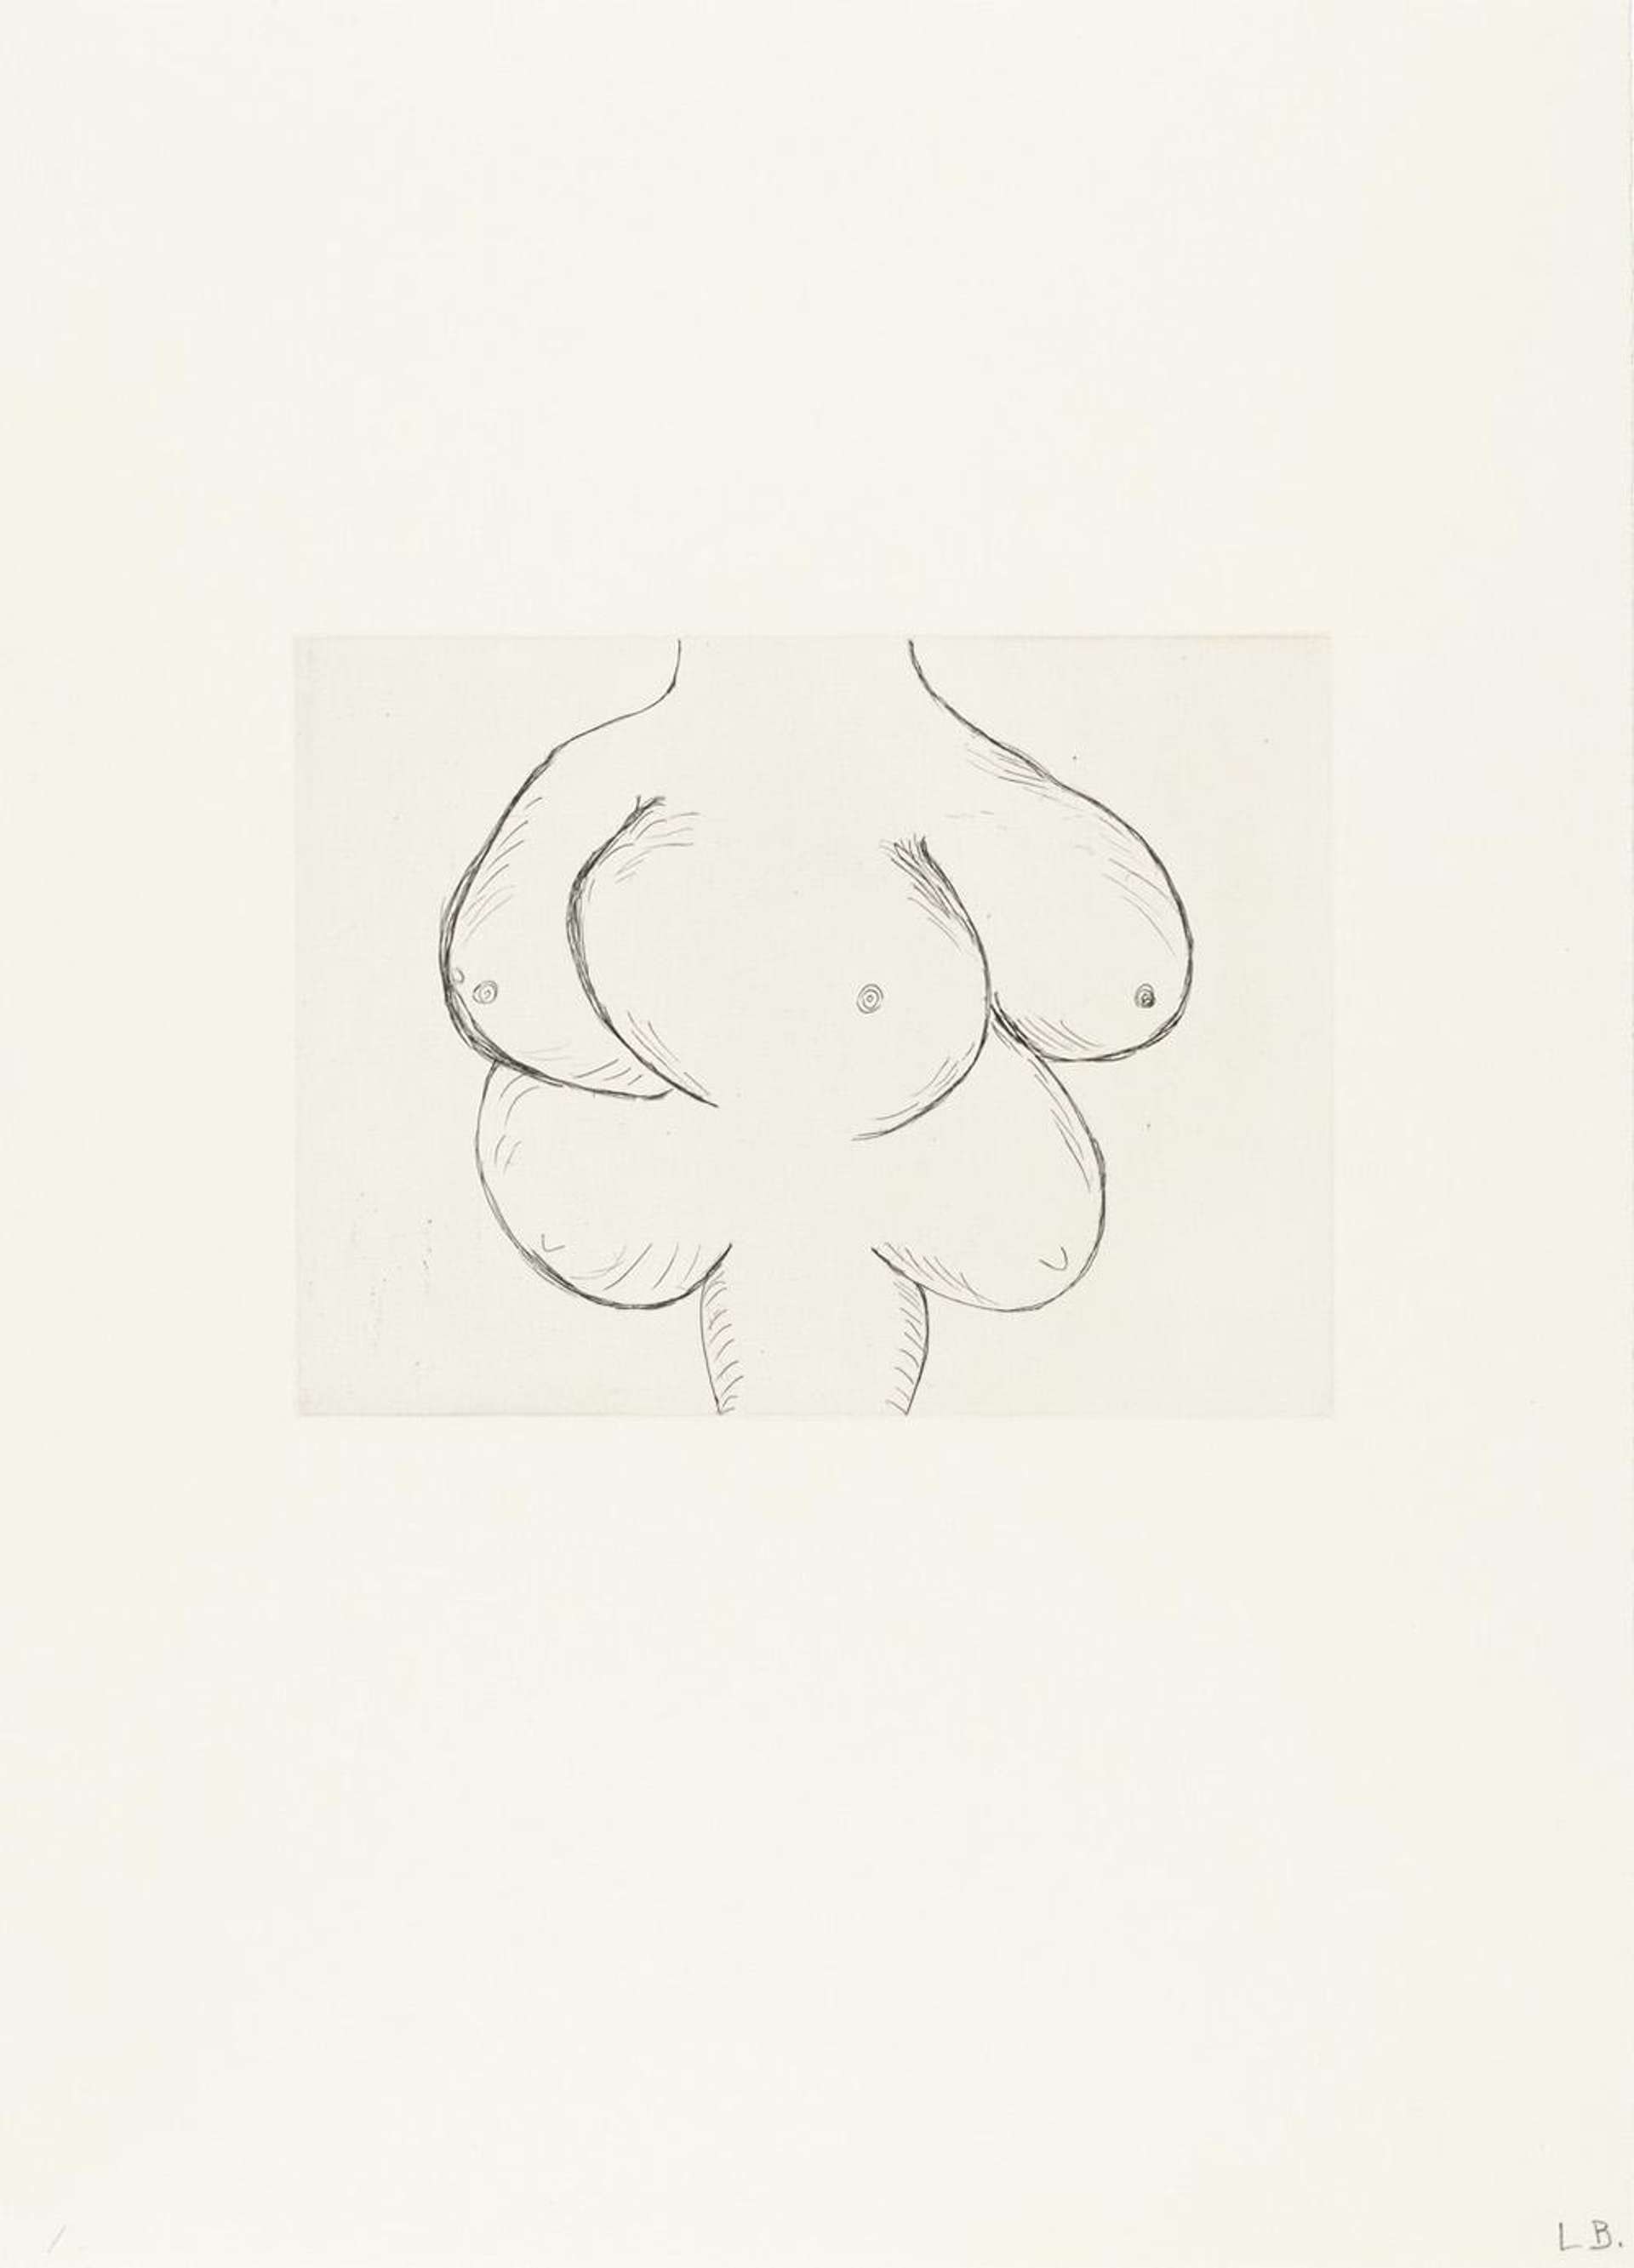 Untitled No. 4 - Signed Print by Louise Bourgeois 1990 - MyArtBroker